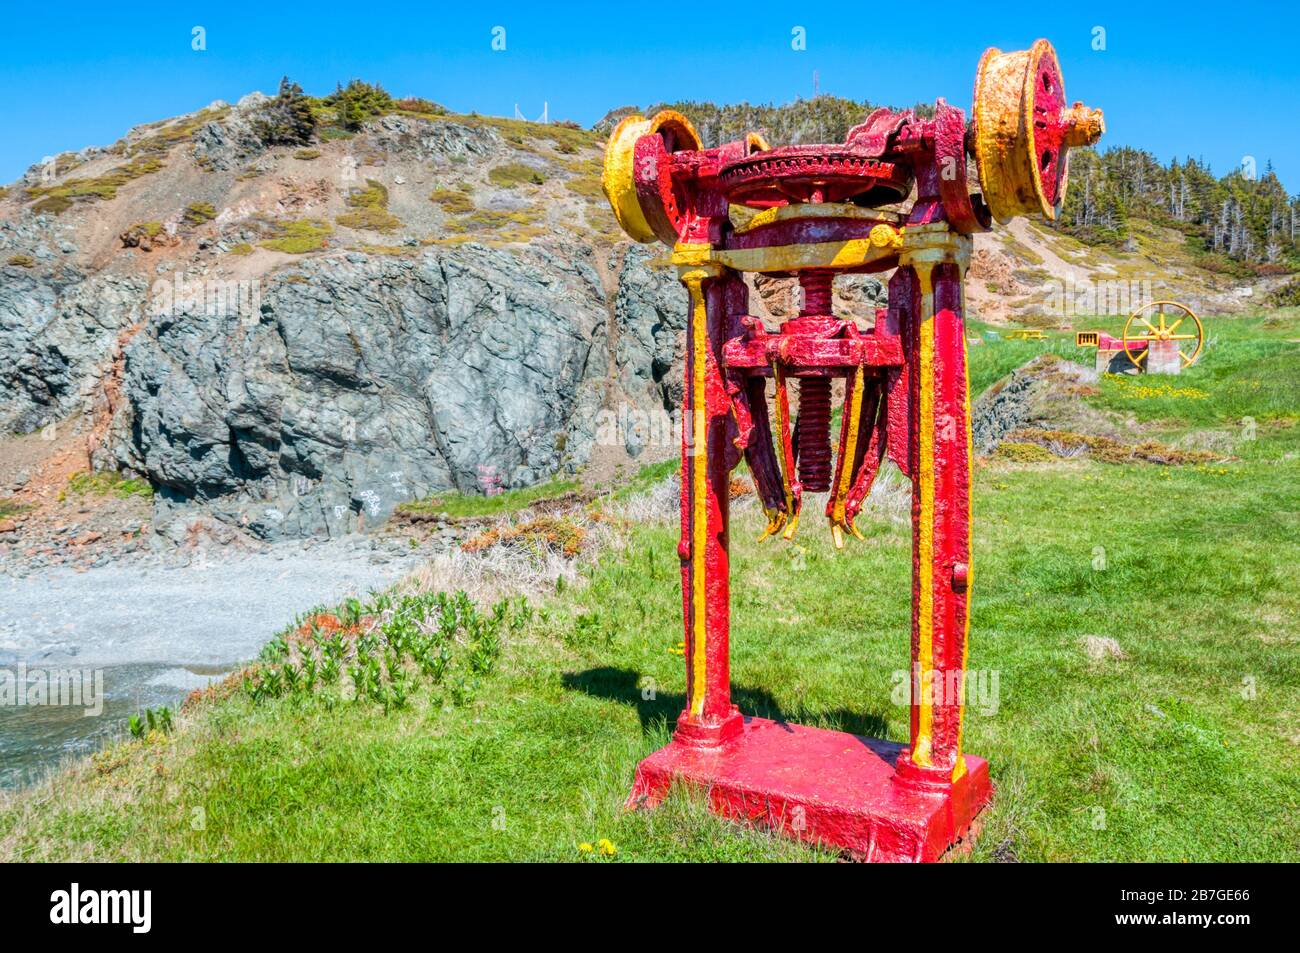 Old mining equipment at the site of the Sleepy Cove copper mine on North Twillingate island, Newfoundland. Stock Photo